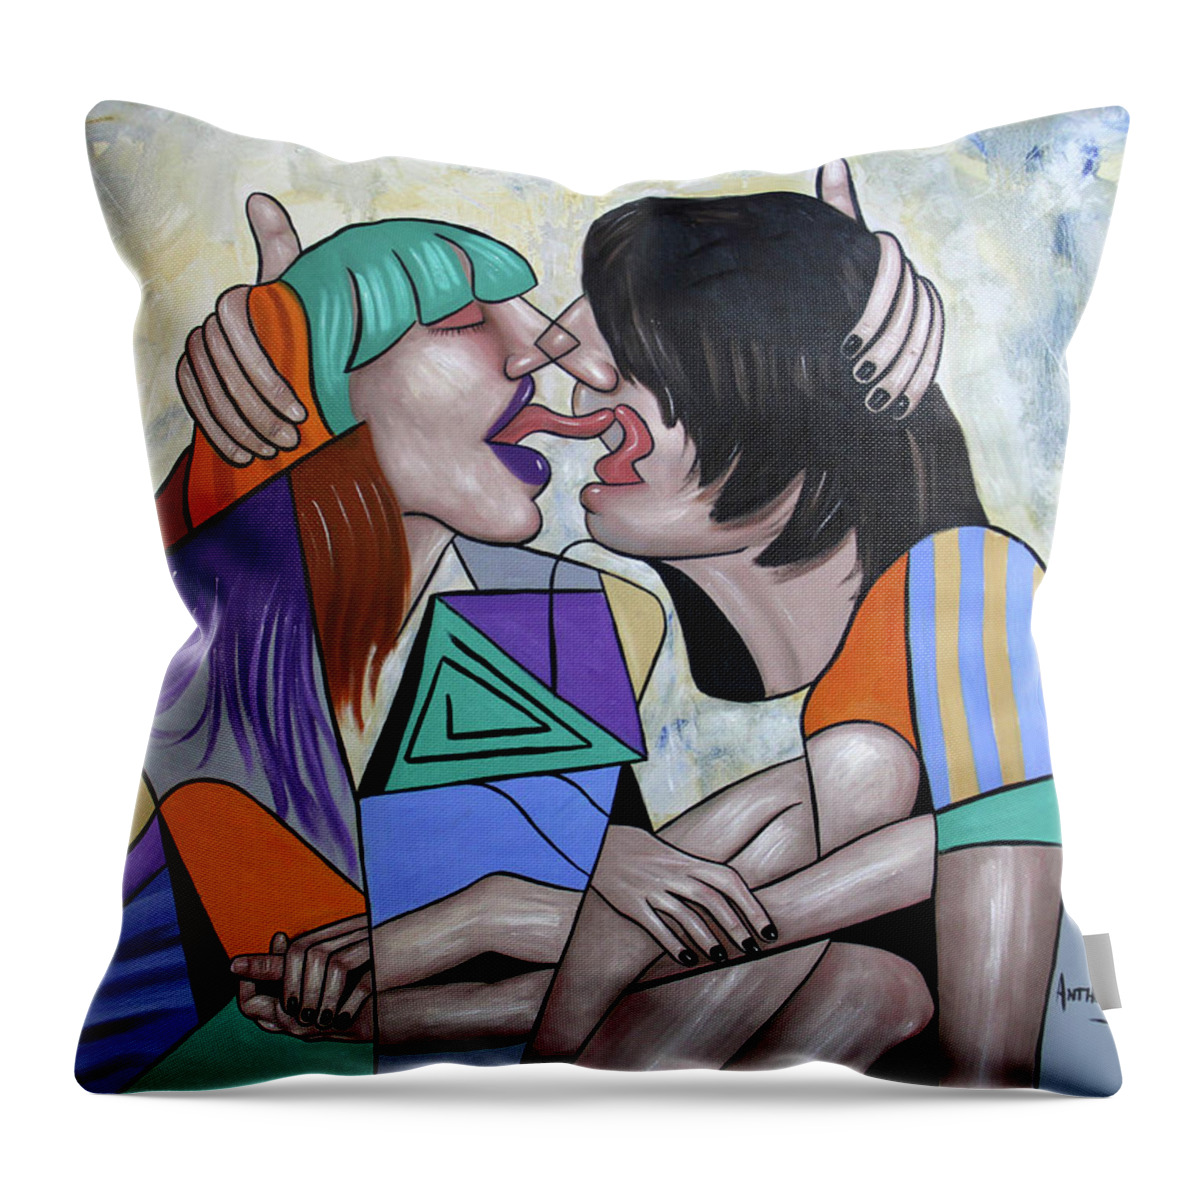 Abstract Throw Pillow featuring the painting Tongue Aerobics by Anthony Falbo